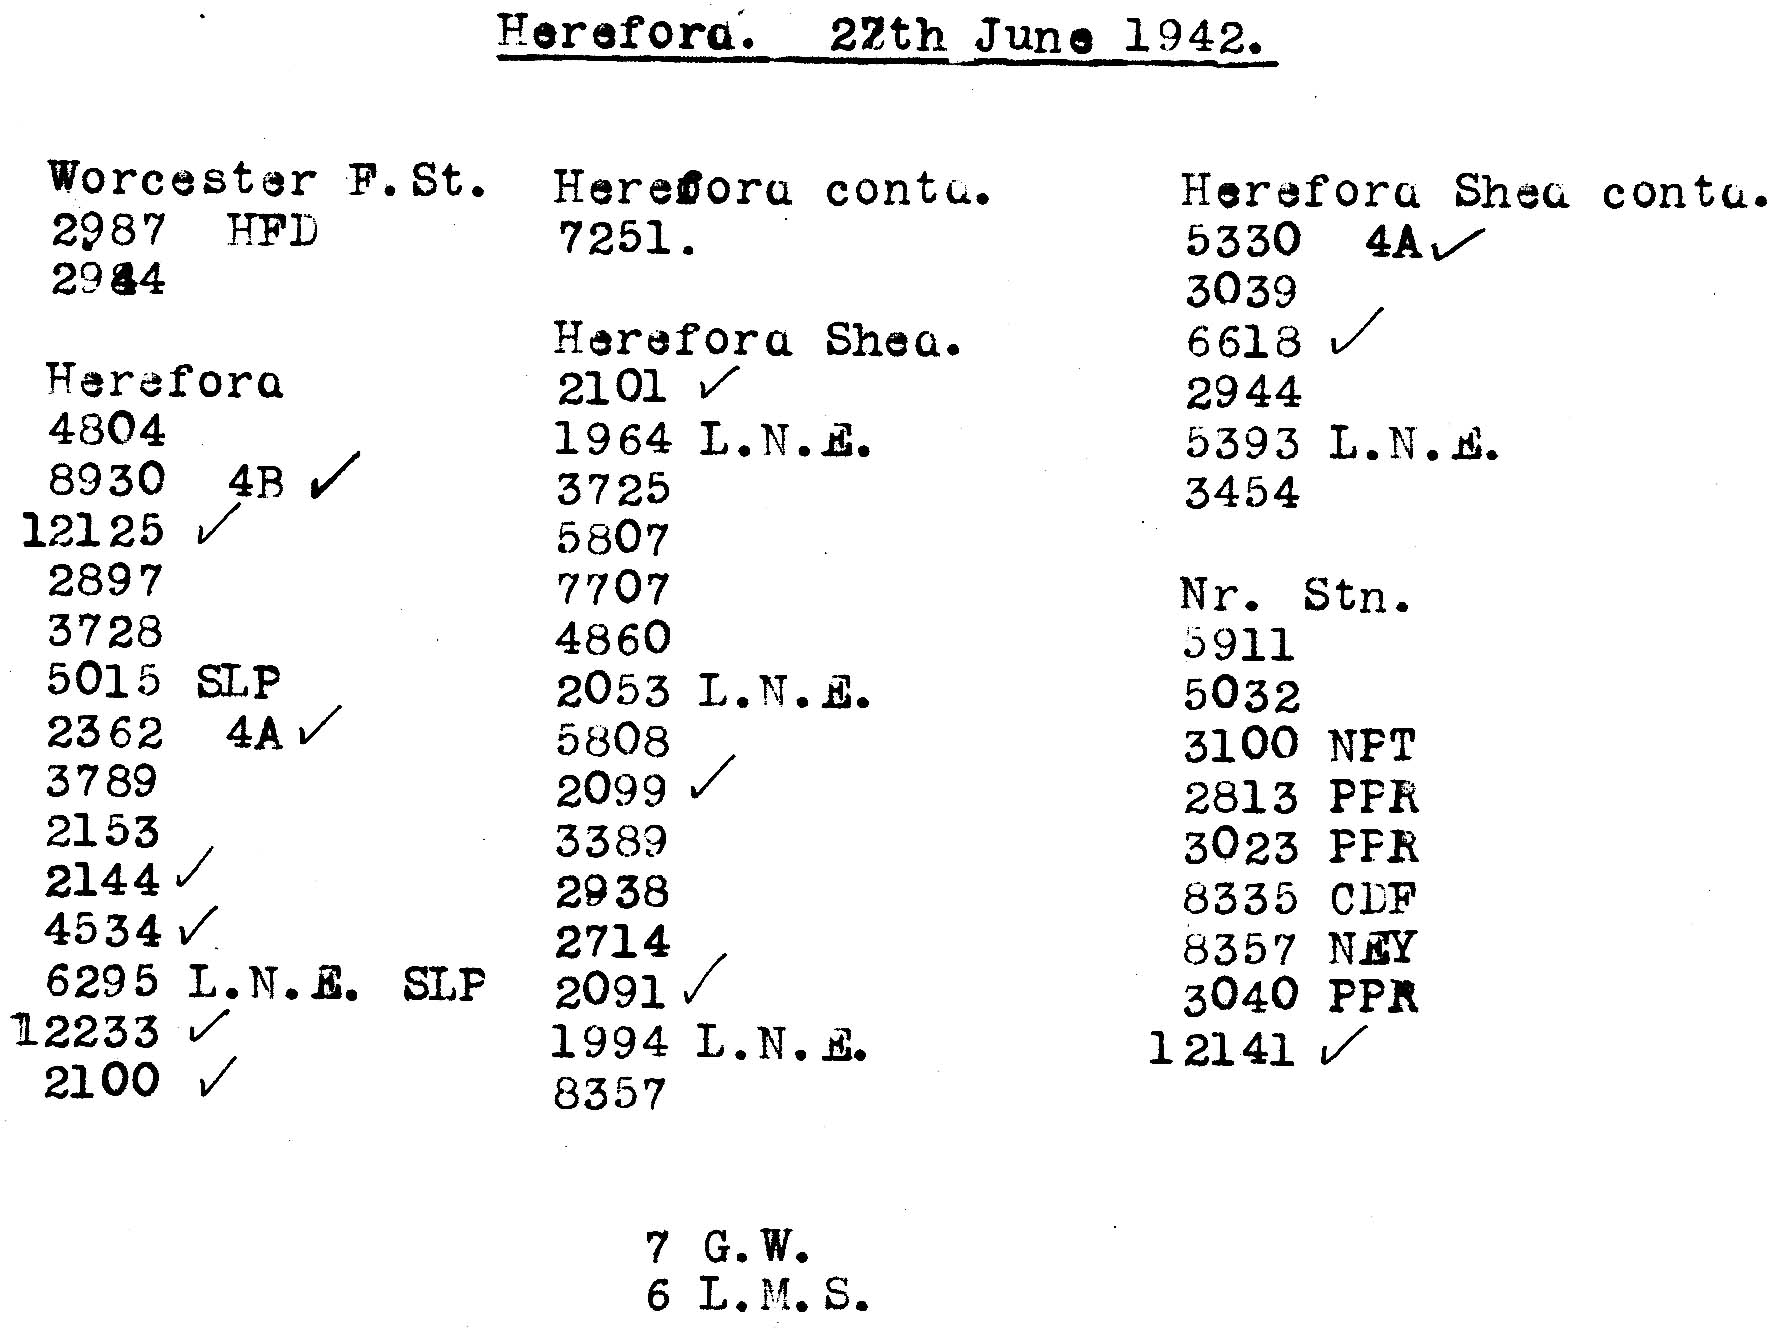 27th June 1942 - Trip to Hereford.